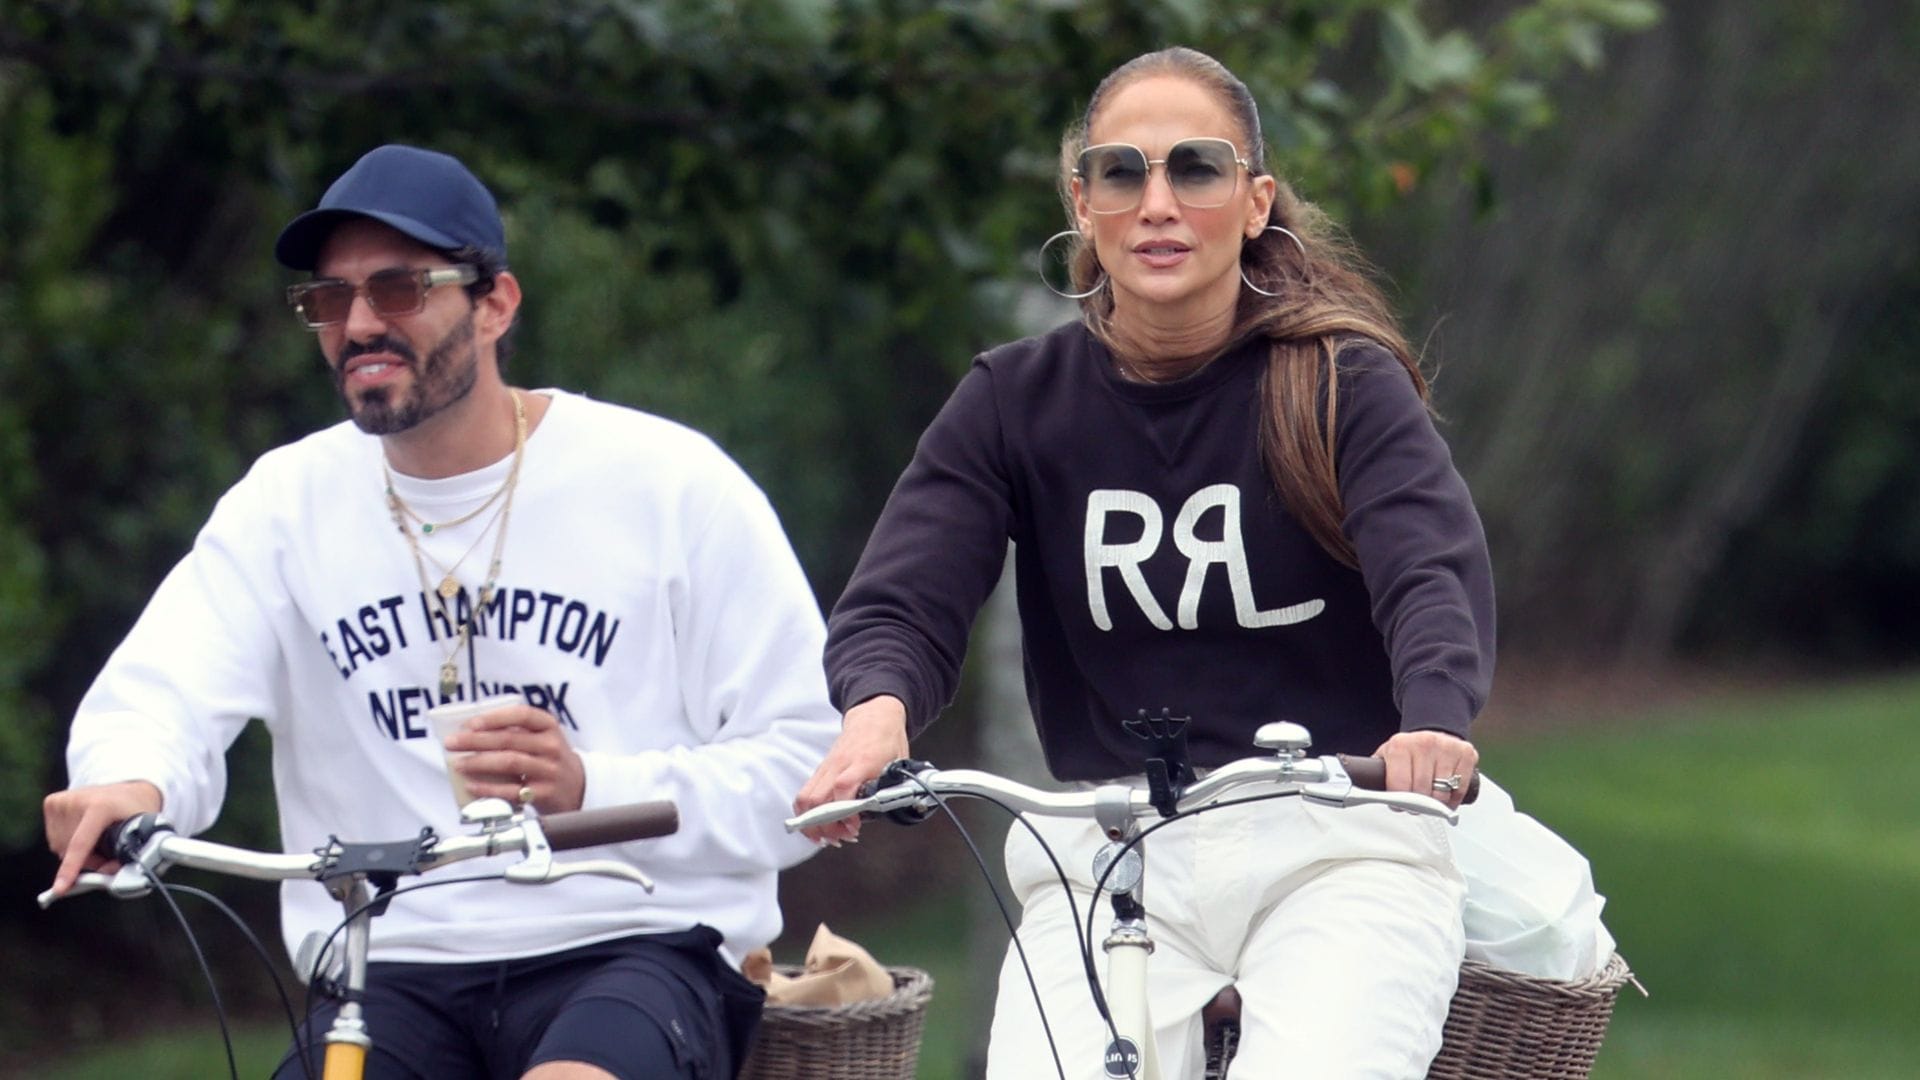 Jennifer Lopez spends the weekend with good company in the Hamptons